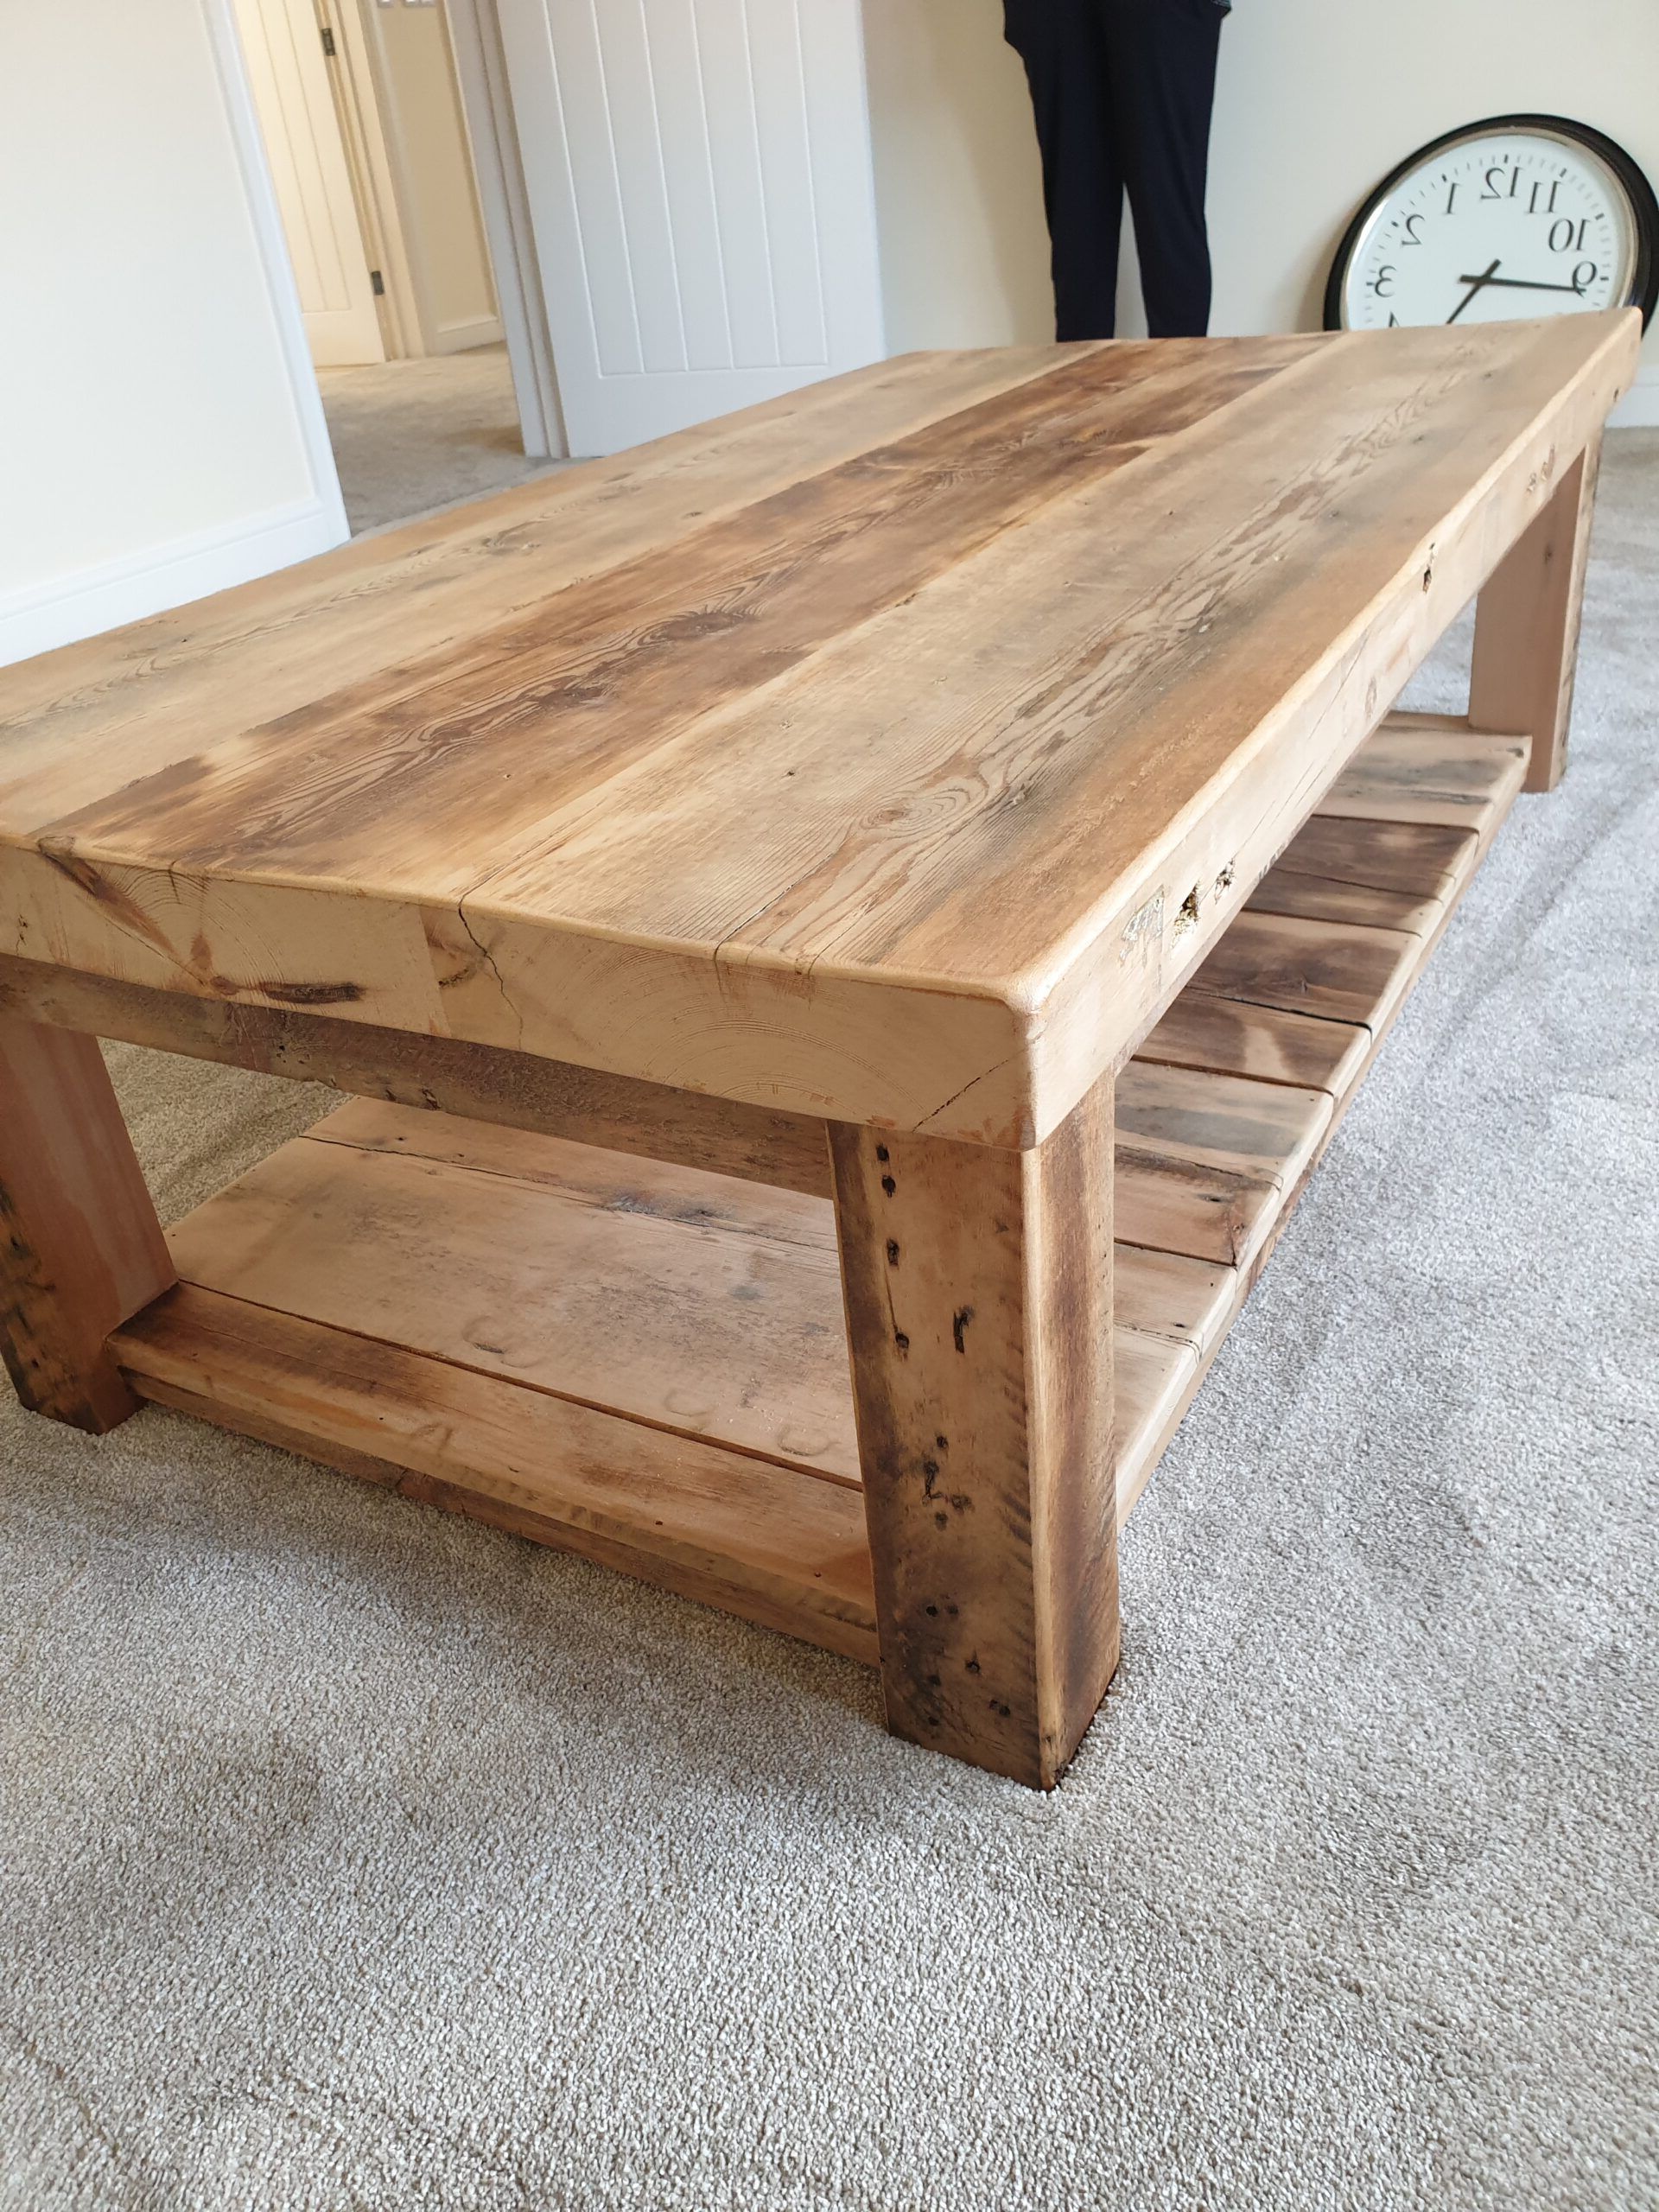 Buy Rustic Wood Coffee Table Made From Reclaimed Timber In Rustic Wood Coffee Tables (View 2 of 20)